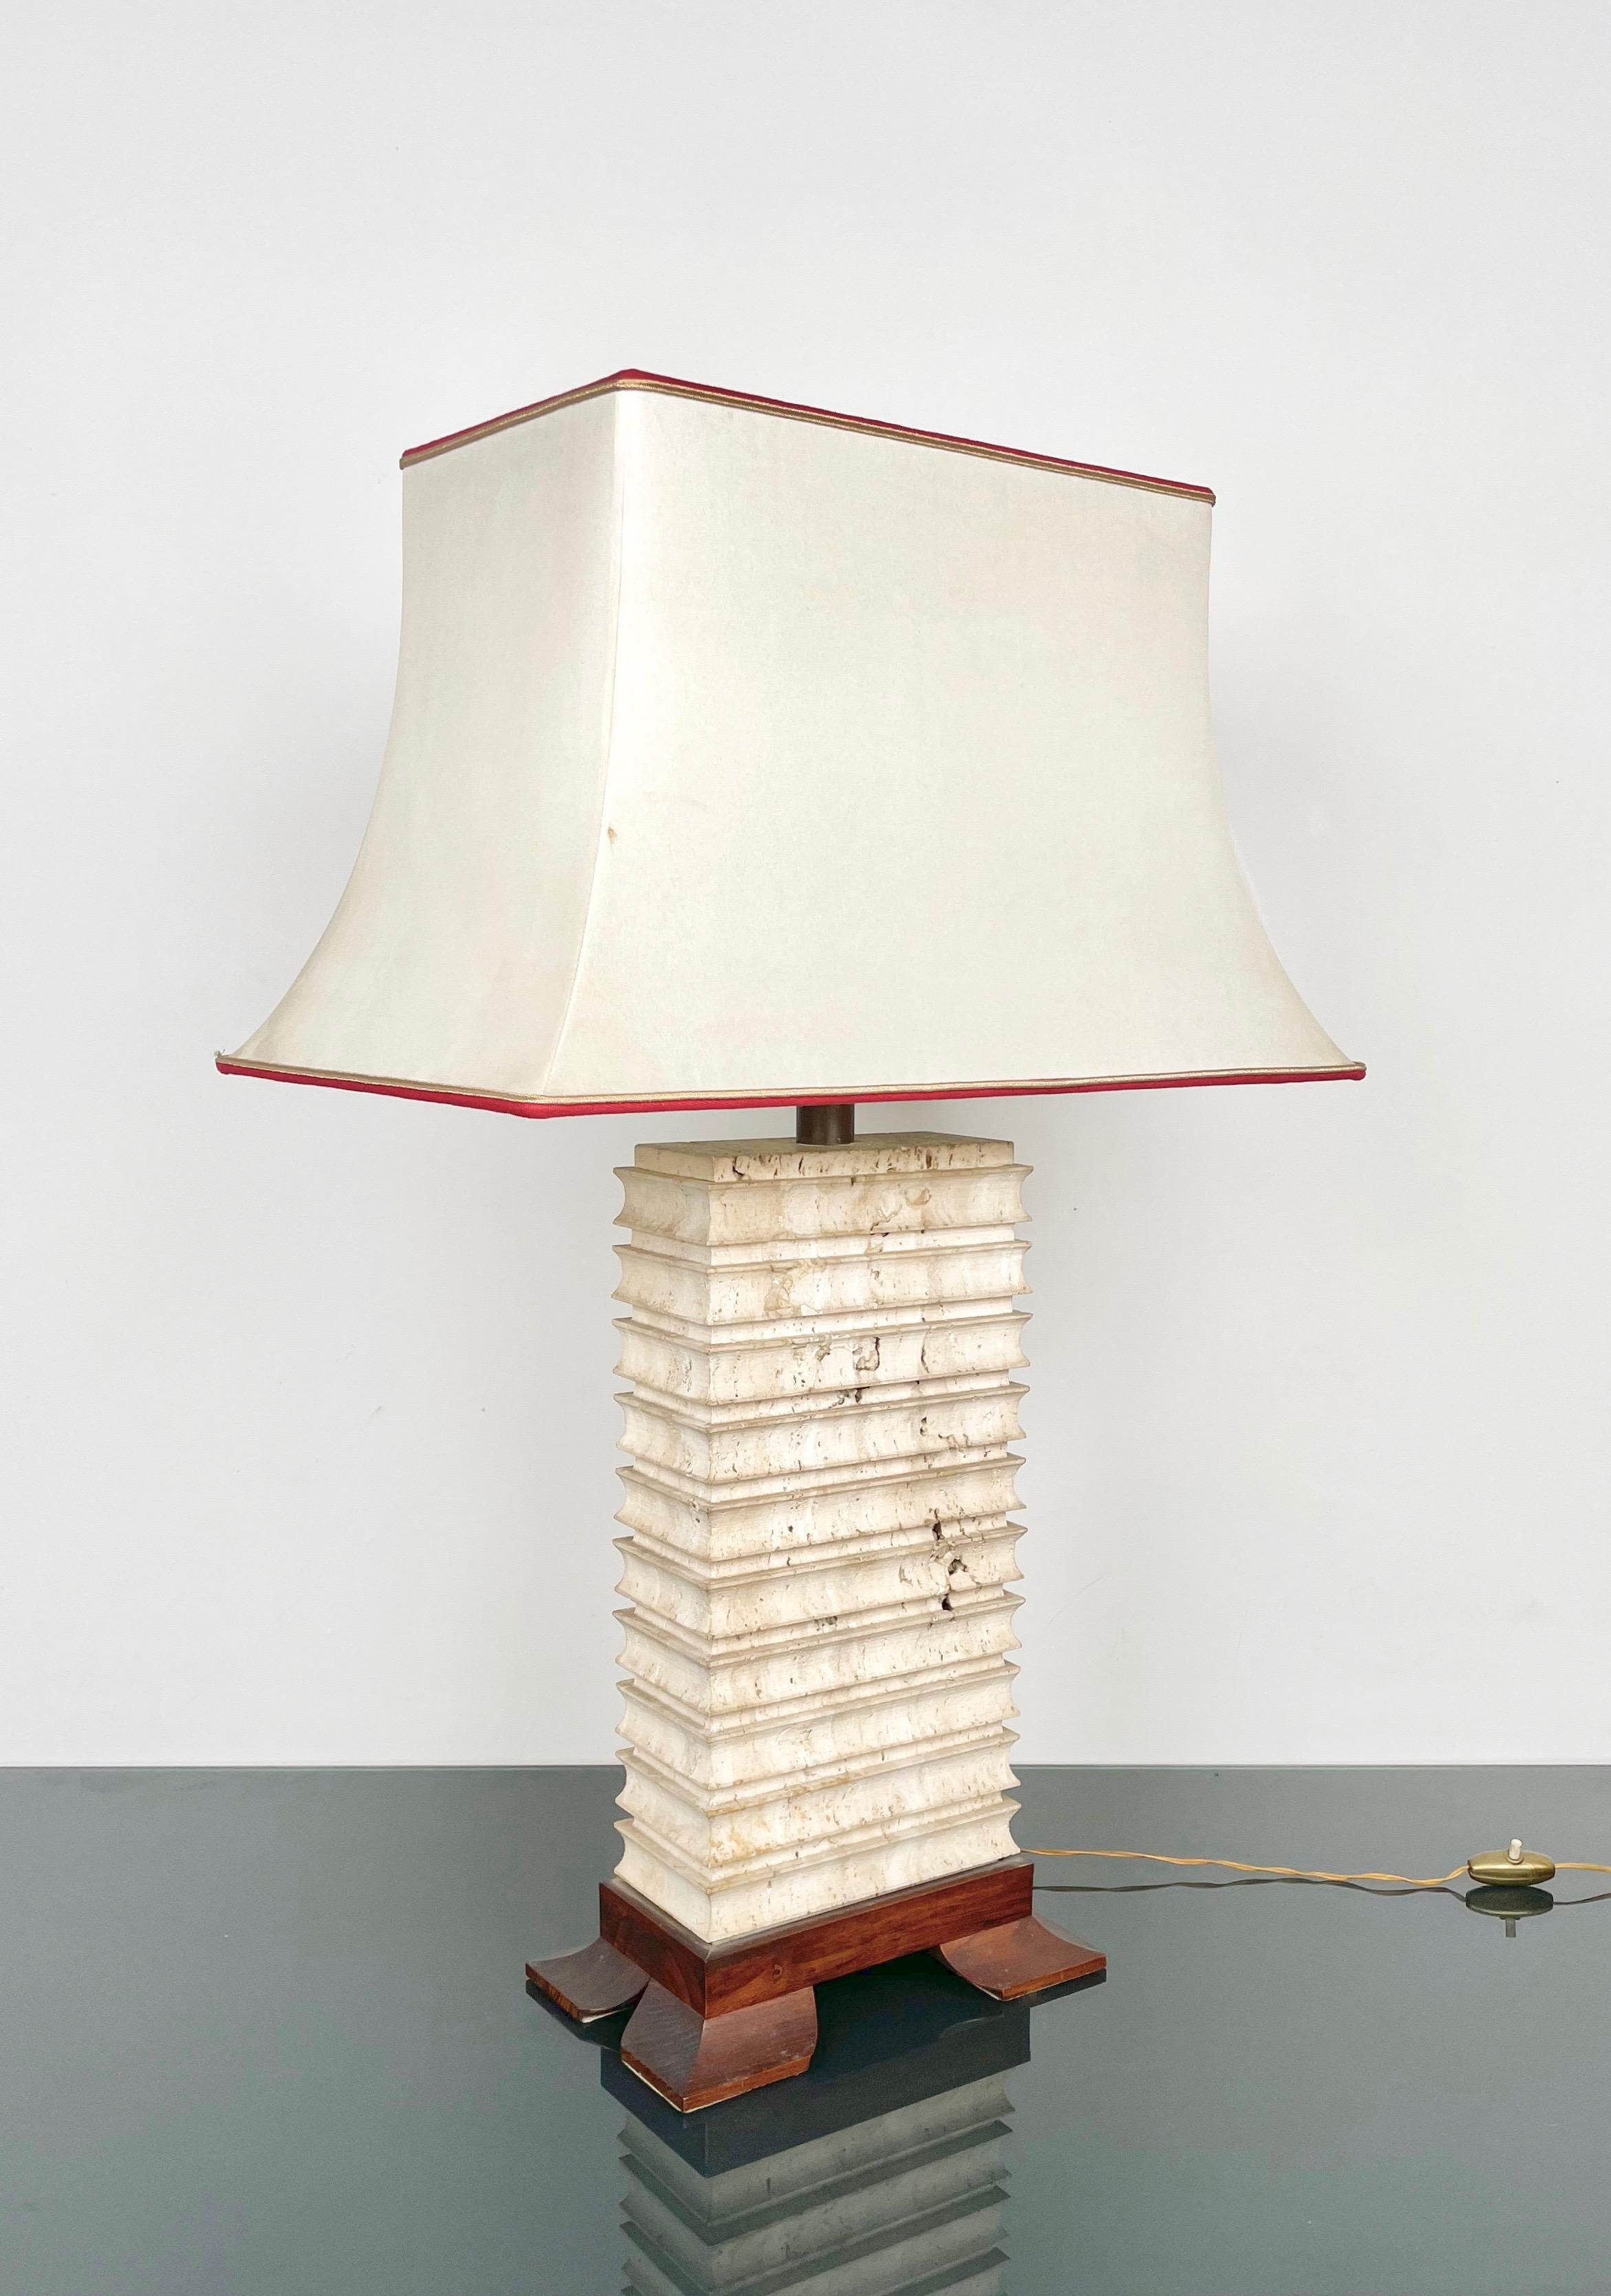 Italian Pagoda Table Lamp in Travertine, Wood and Brass, Italy 1970s For Sale